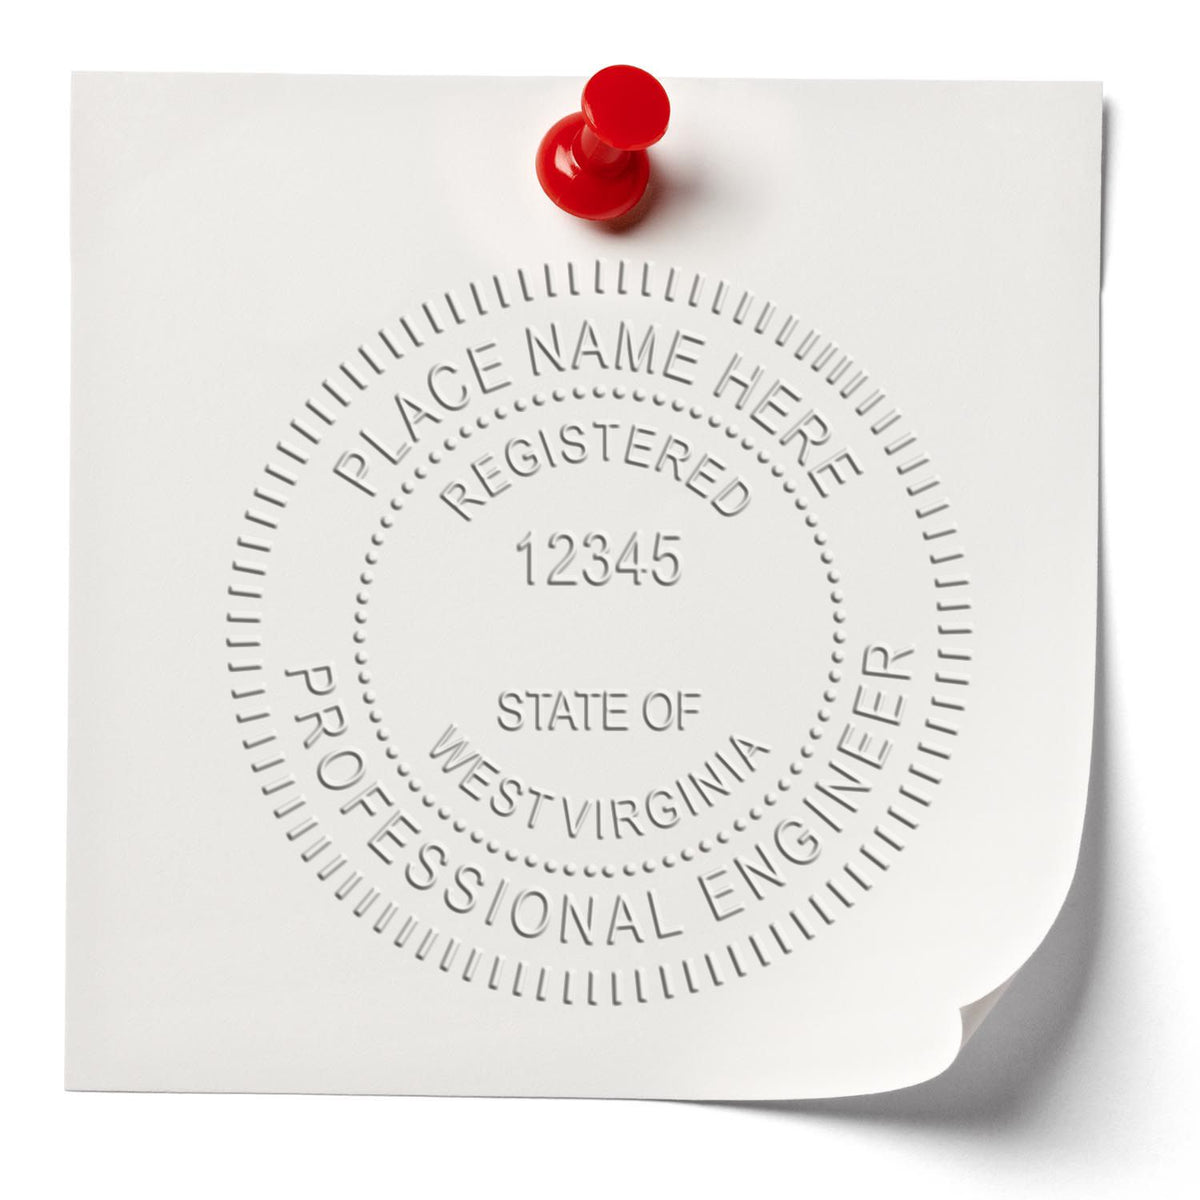 The Gift West Virginia Engineer Seal stamp impression comes to life with a crisp, detailed image stamped on paper - showcasing true professional quality.